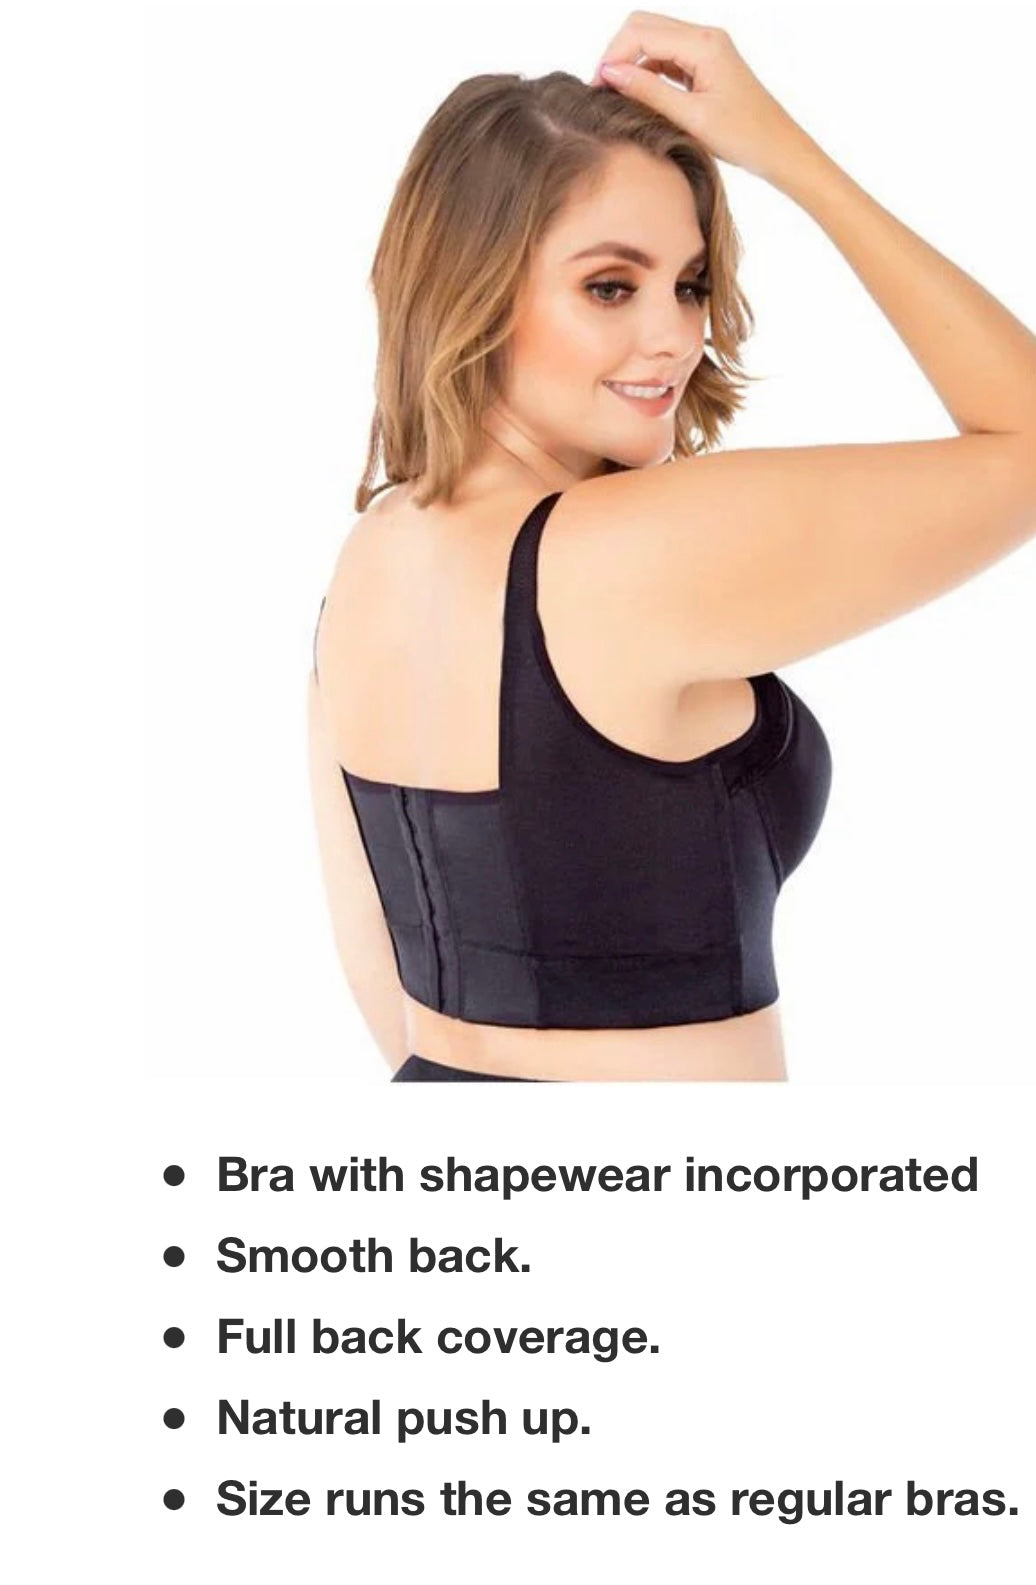 Best Bra For Lift And Back Fat  Top 10 Bras To Hide Back Fat